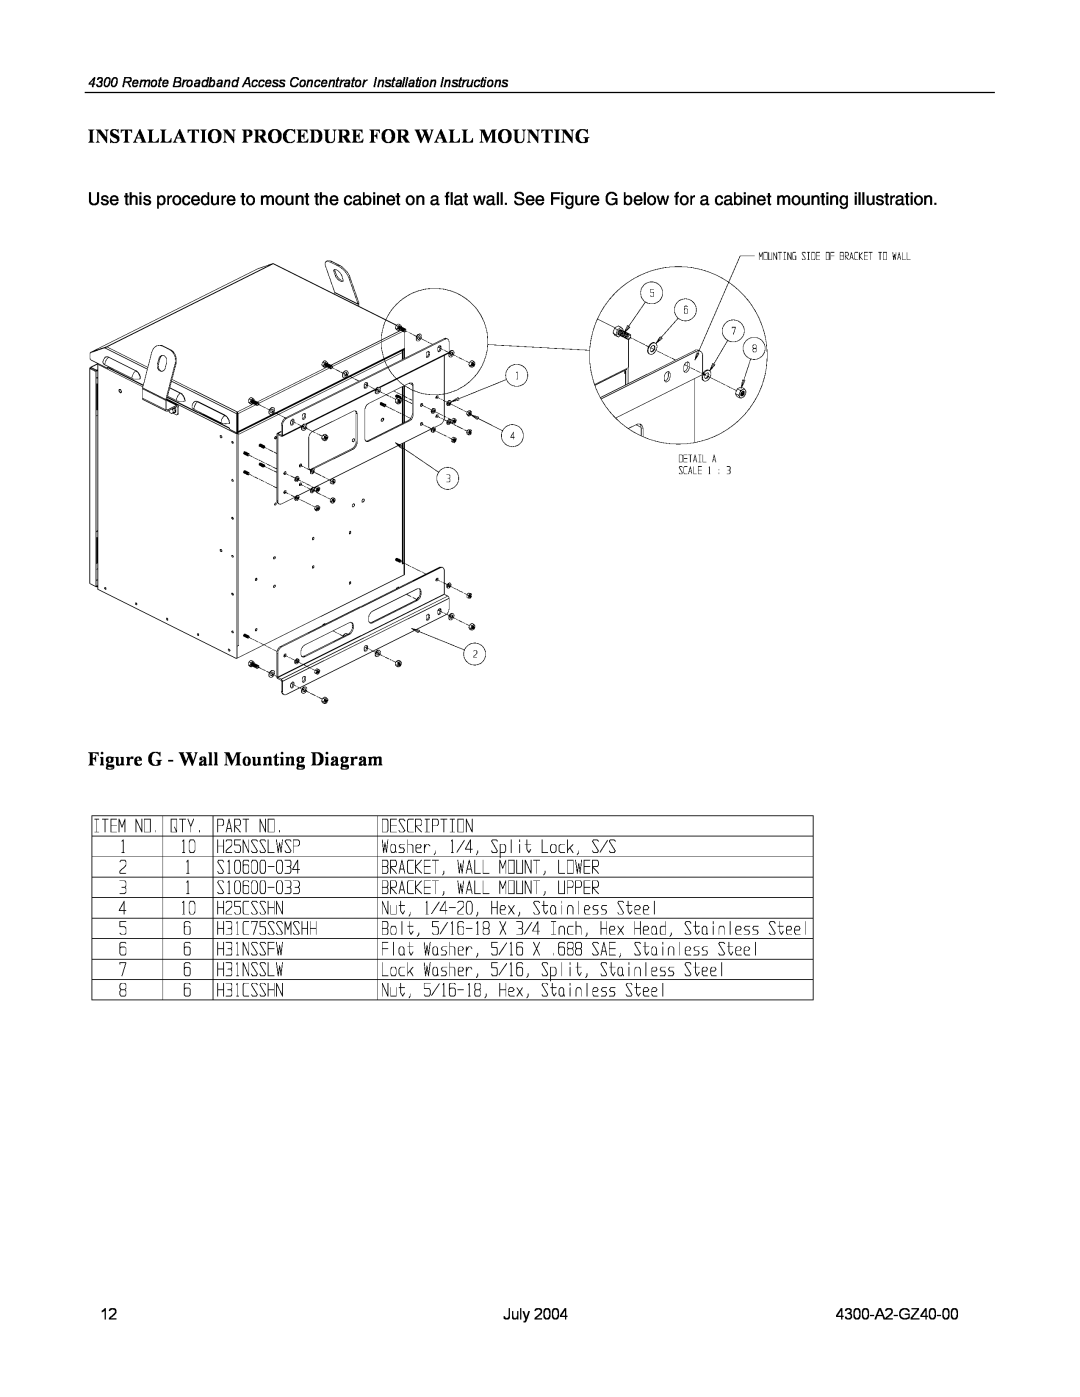 Paradyne Installation Procedure For Wall Mounting, Figure G - Wall Mounting Diagram, July, 4300-A2-GZ40-00 